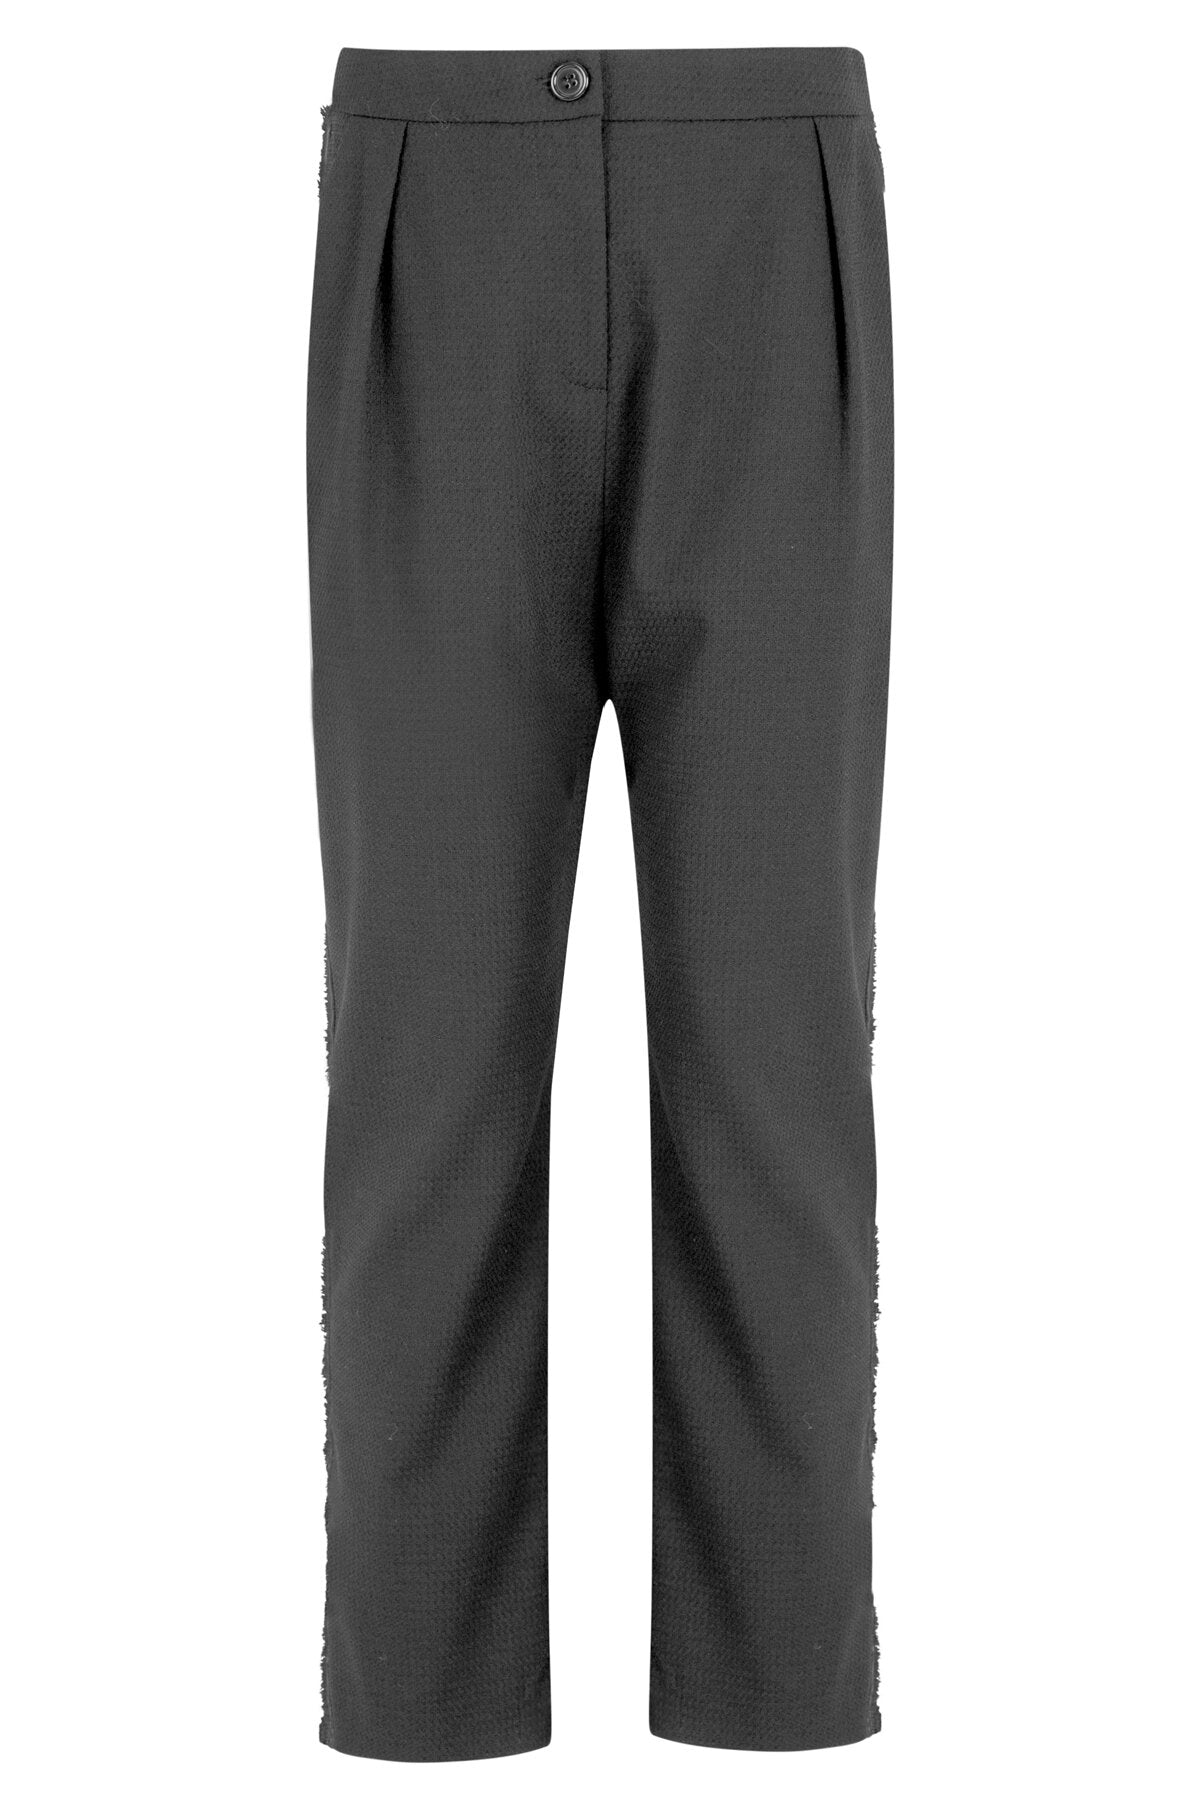 TRELISE COOPER STRIDE OF PLACE Trouser TC4545-48PF23